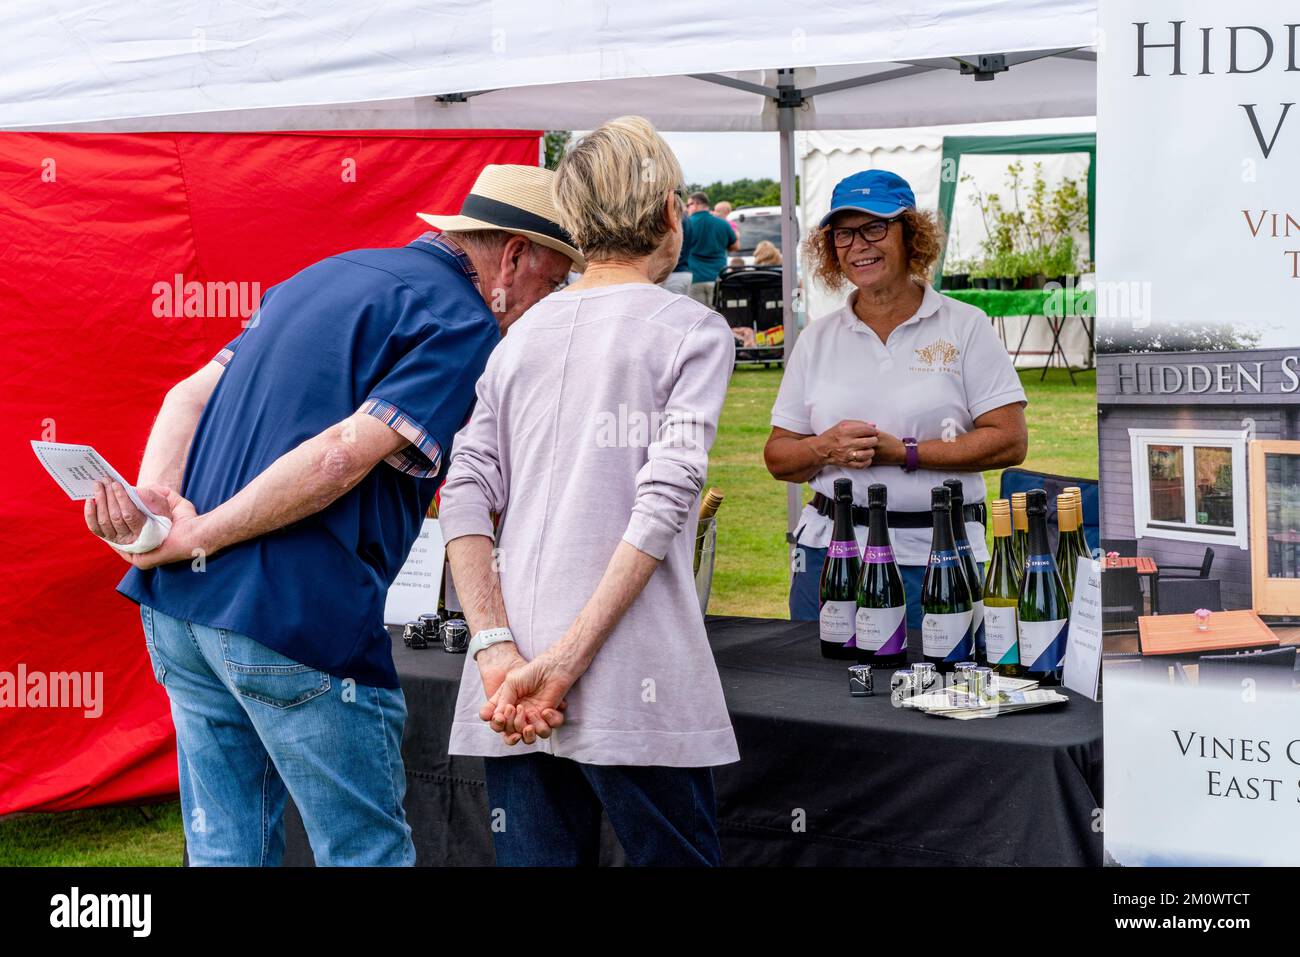 A Senior Couple Look At A Display Of Wine From The Hidden Spring Vineyard, Hartfield Village Fete, Hartfield, East Sussex, UK. Stock Photo